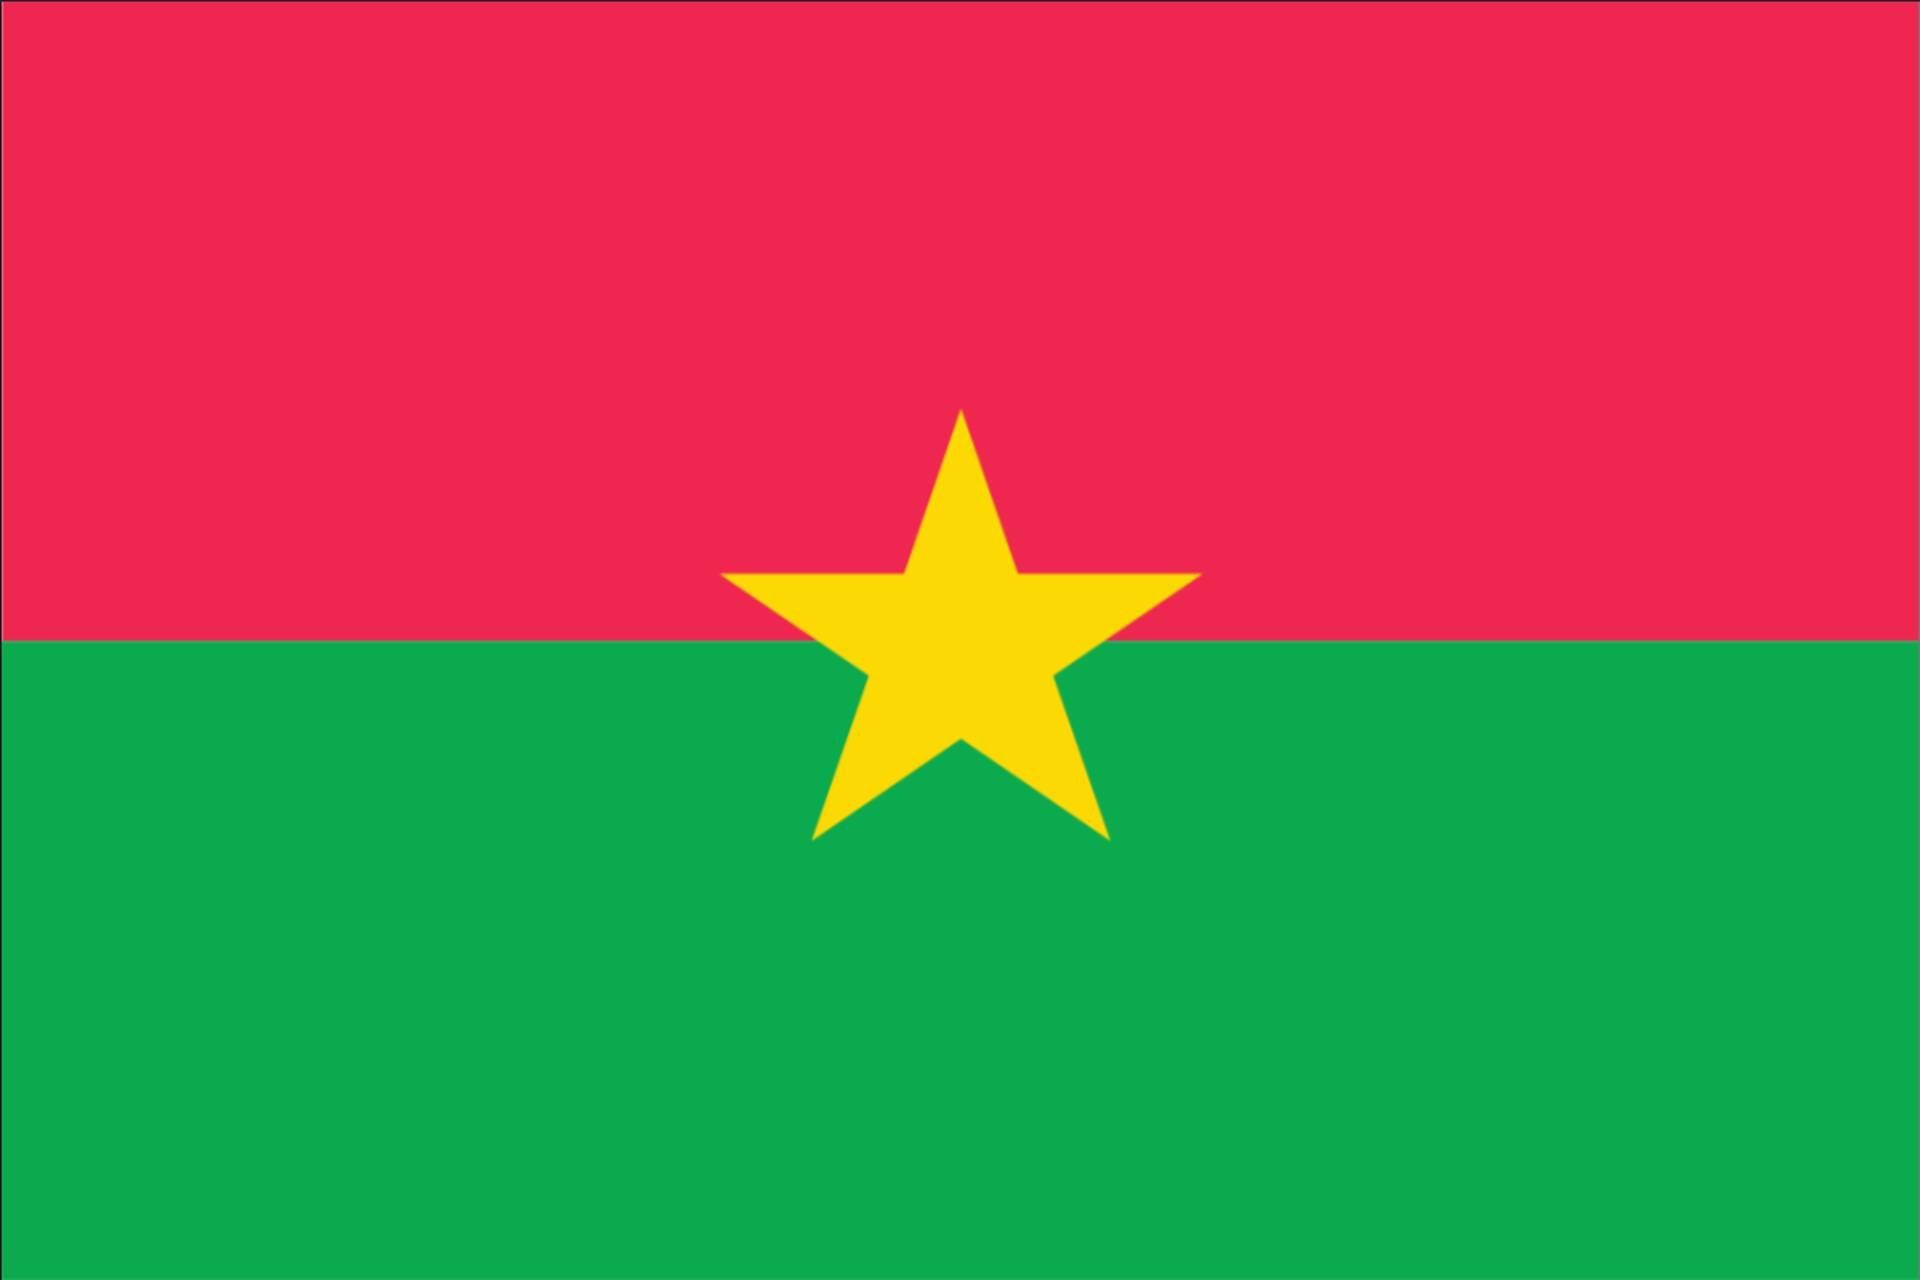 Burkina g/m² Flagge Querformat 120 Faso flaggenmeer